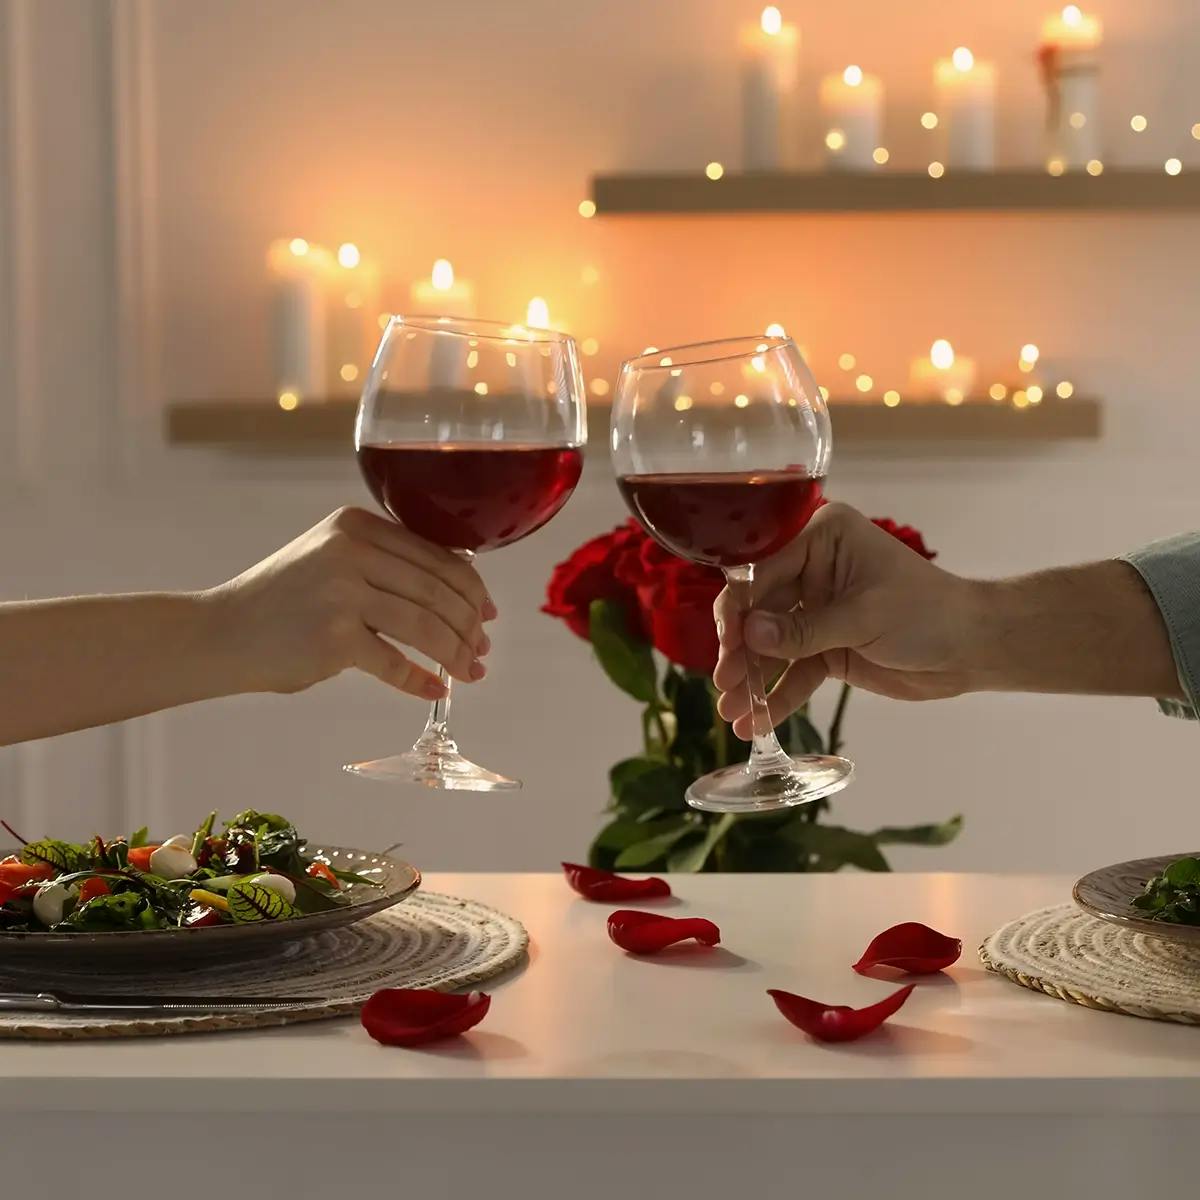 Two hands toasting with red wine glasses at a table set with dinner for two, with candles in the background.